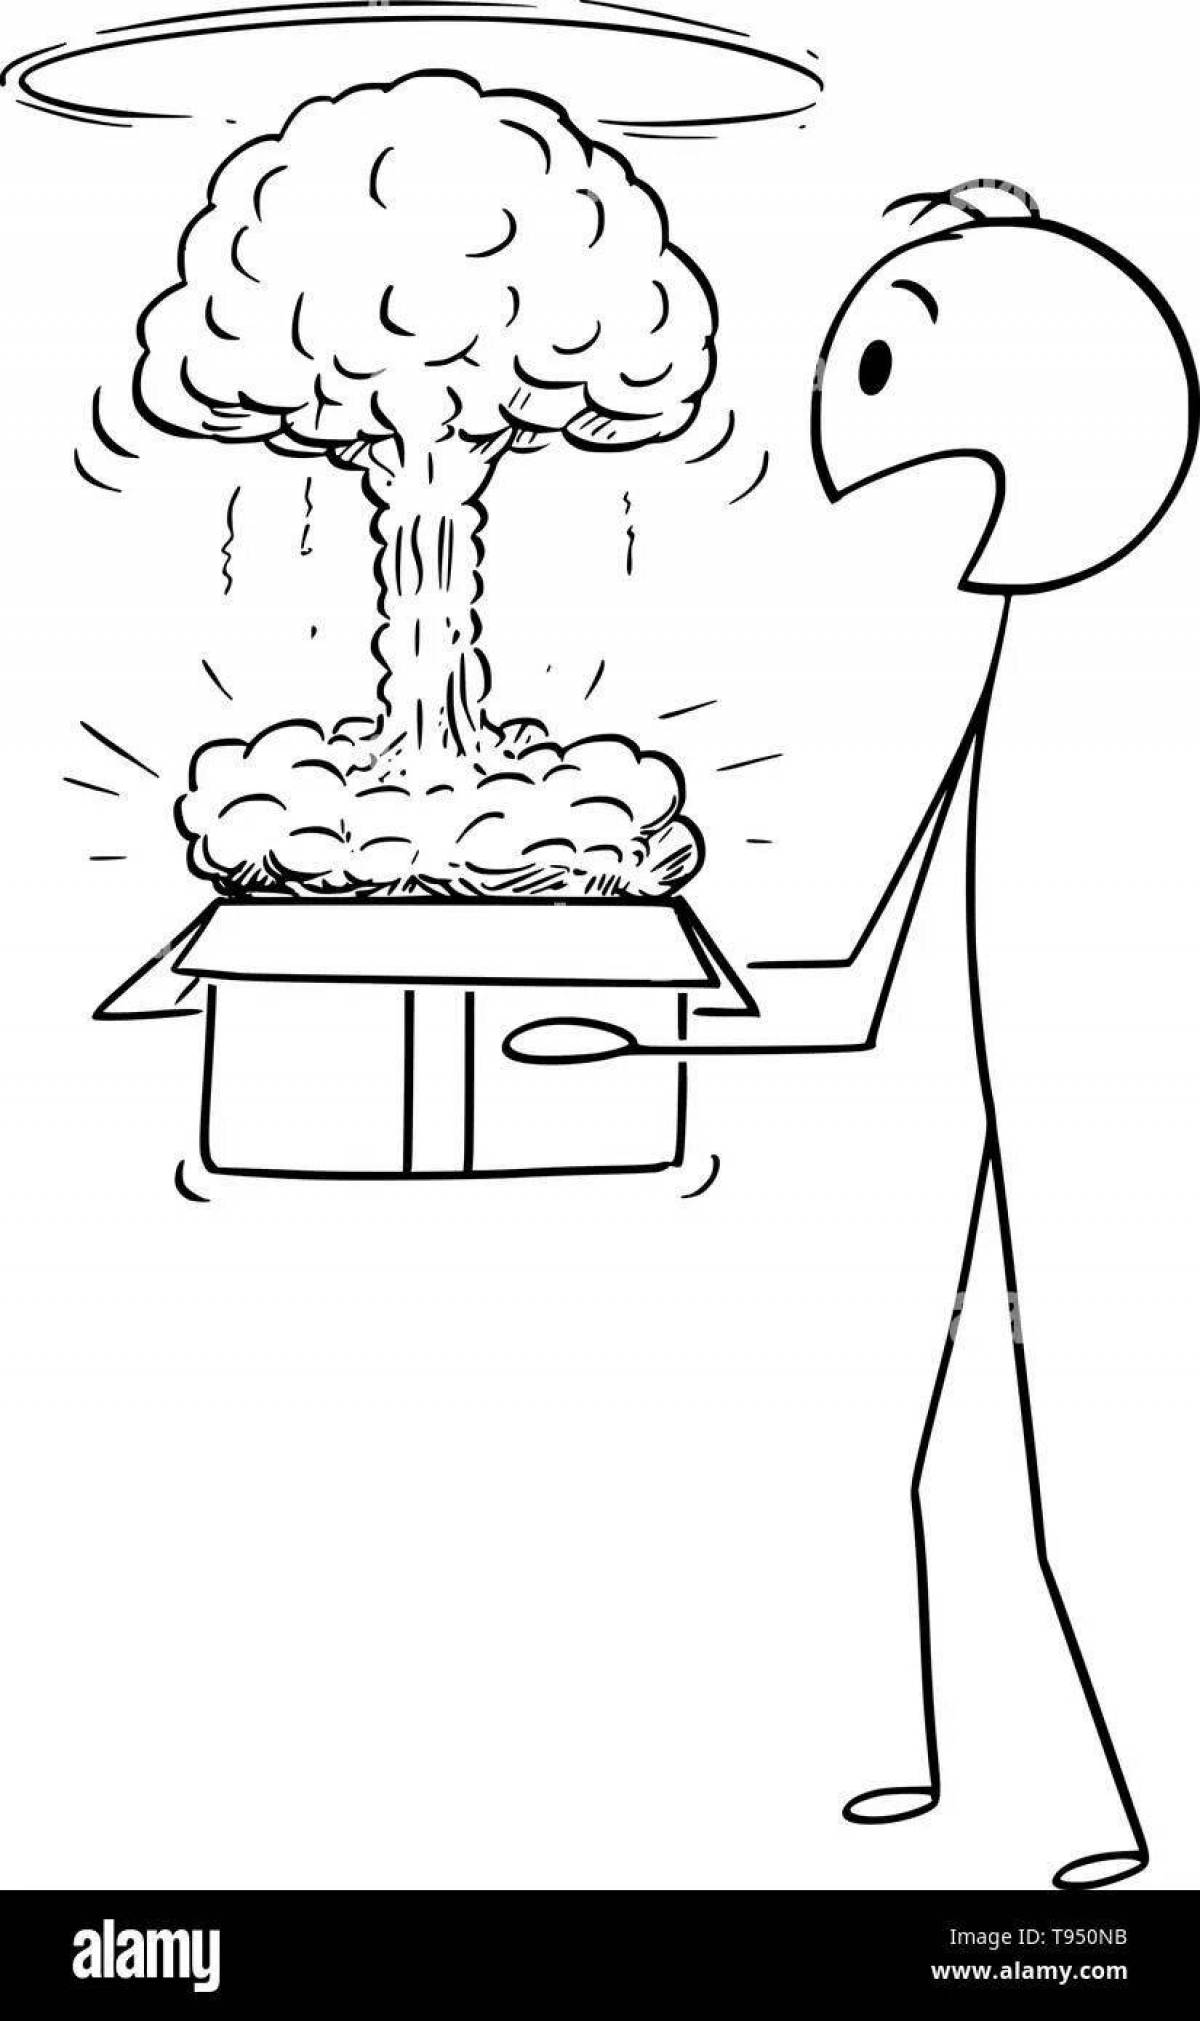 Nuclear Explosion Majestic Coloring Page